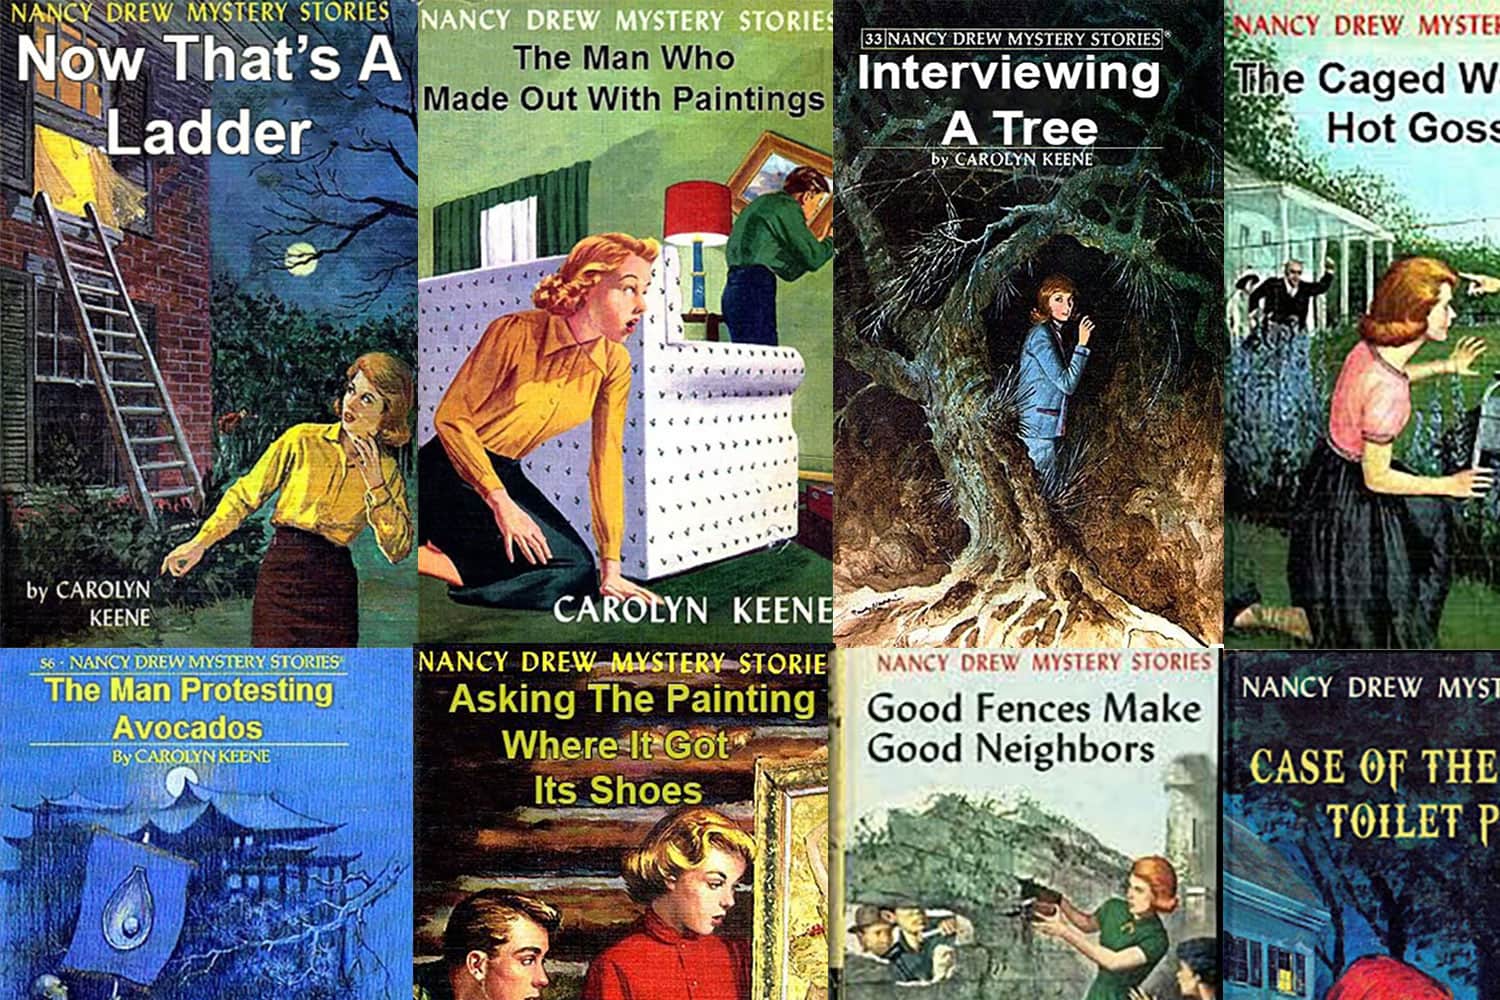 25 Fake Nancy Drew Book Covers You'll Want to See - Let's Eat Cake